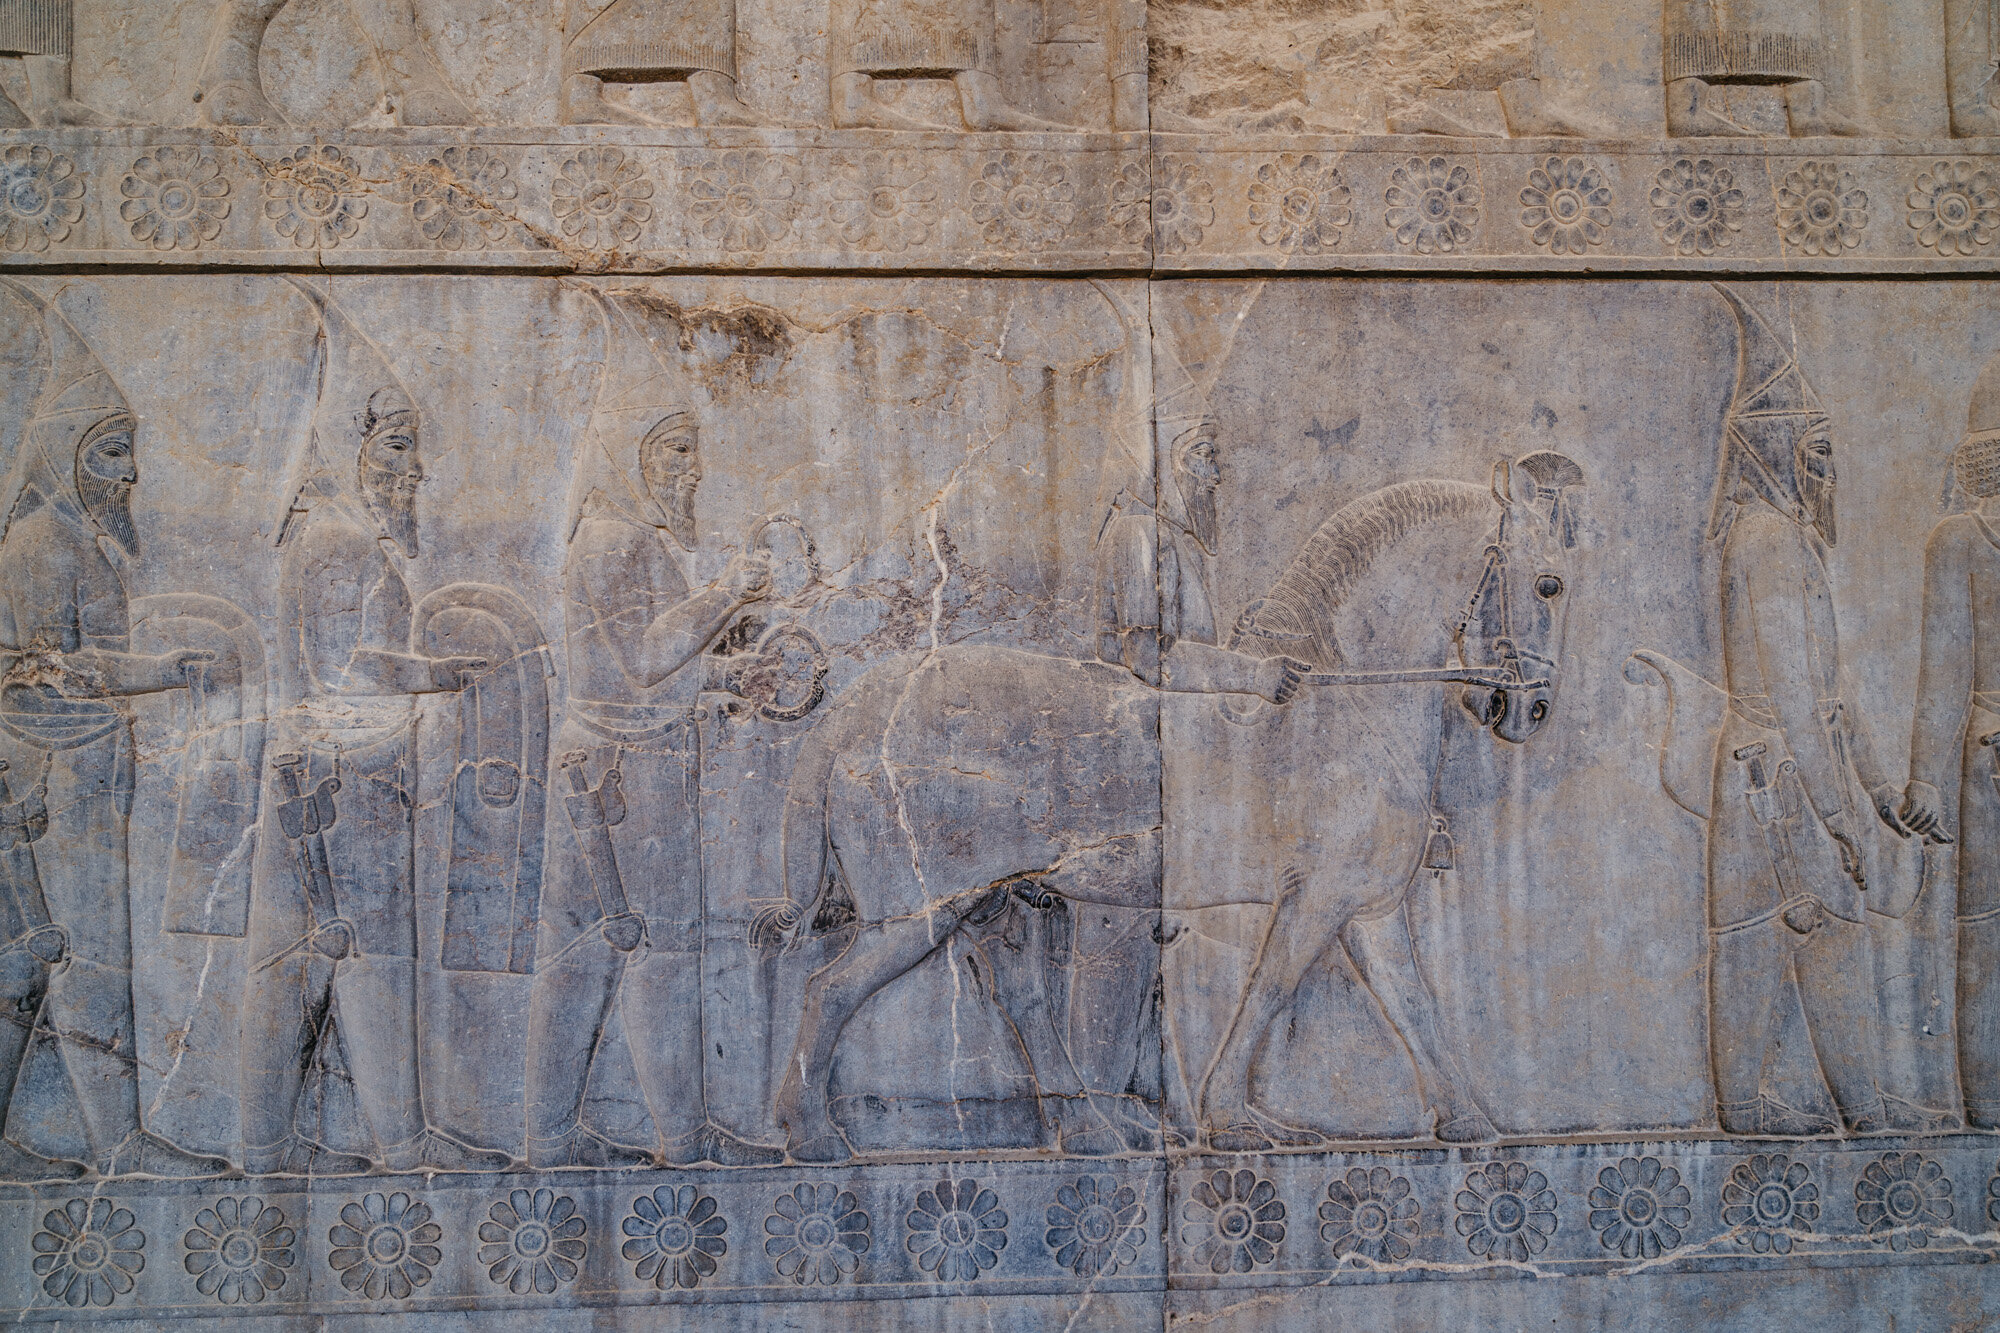  Bas reliefs  depict delegations from across the Persian empire bringing tribute to the Achaemenid kings 